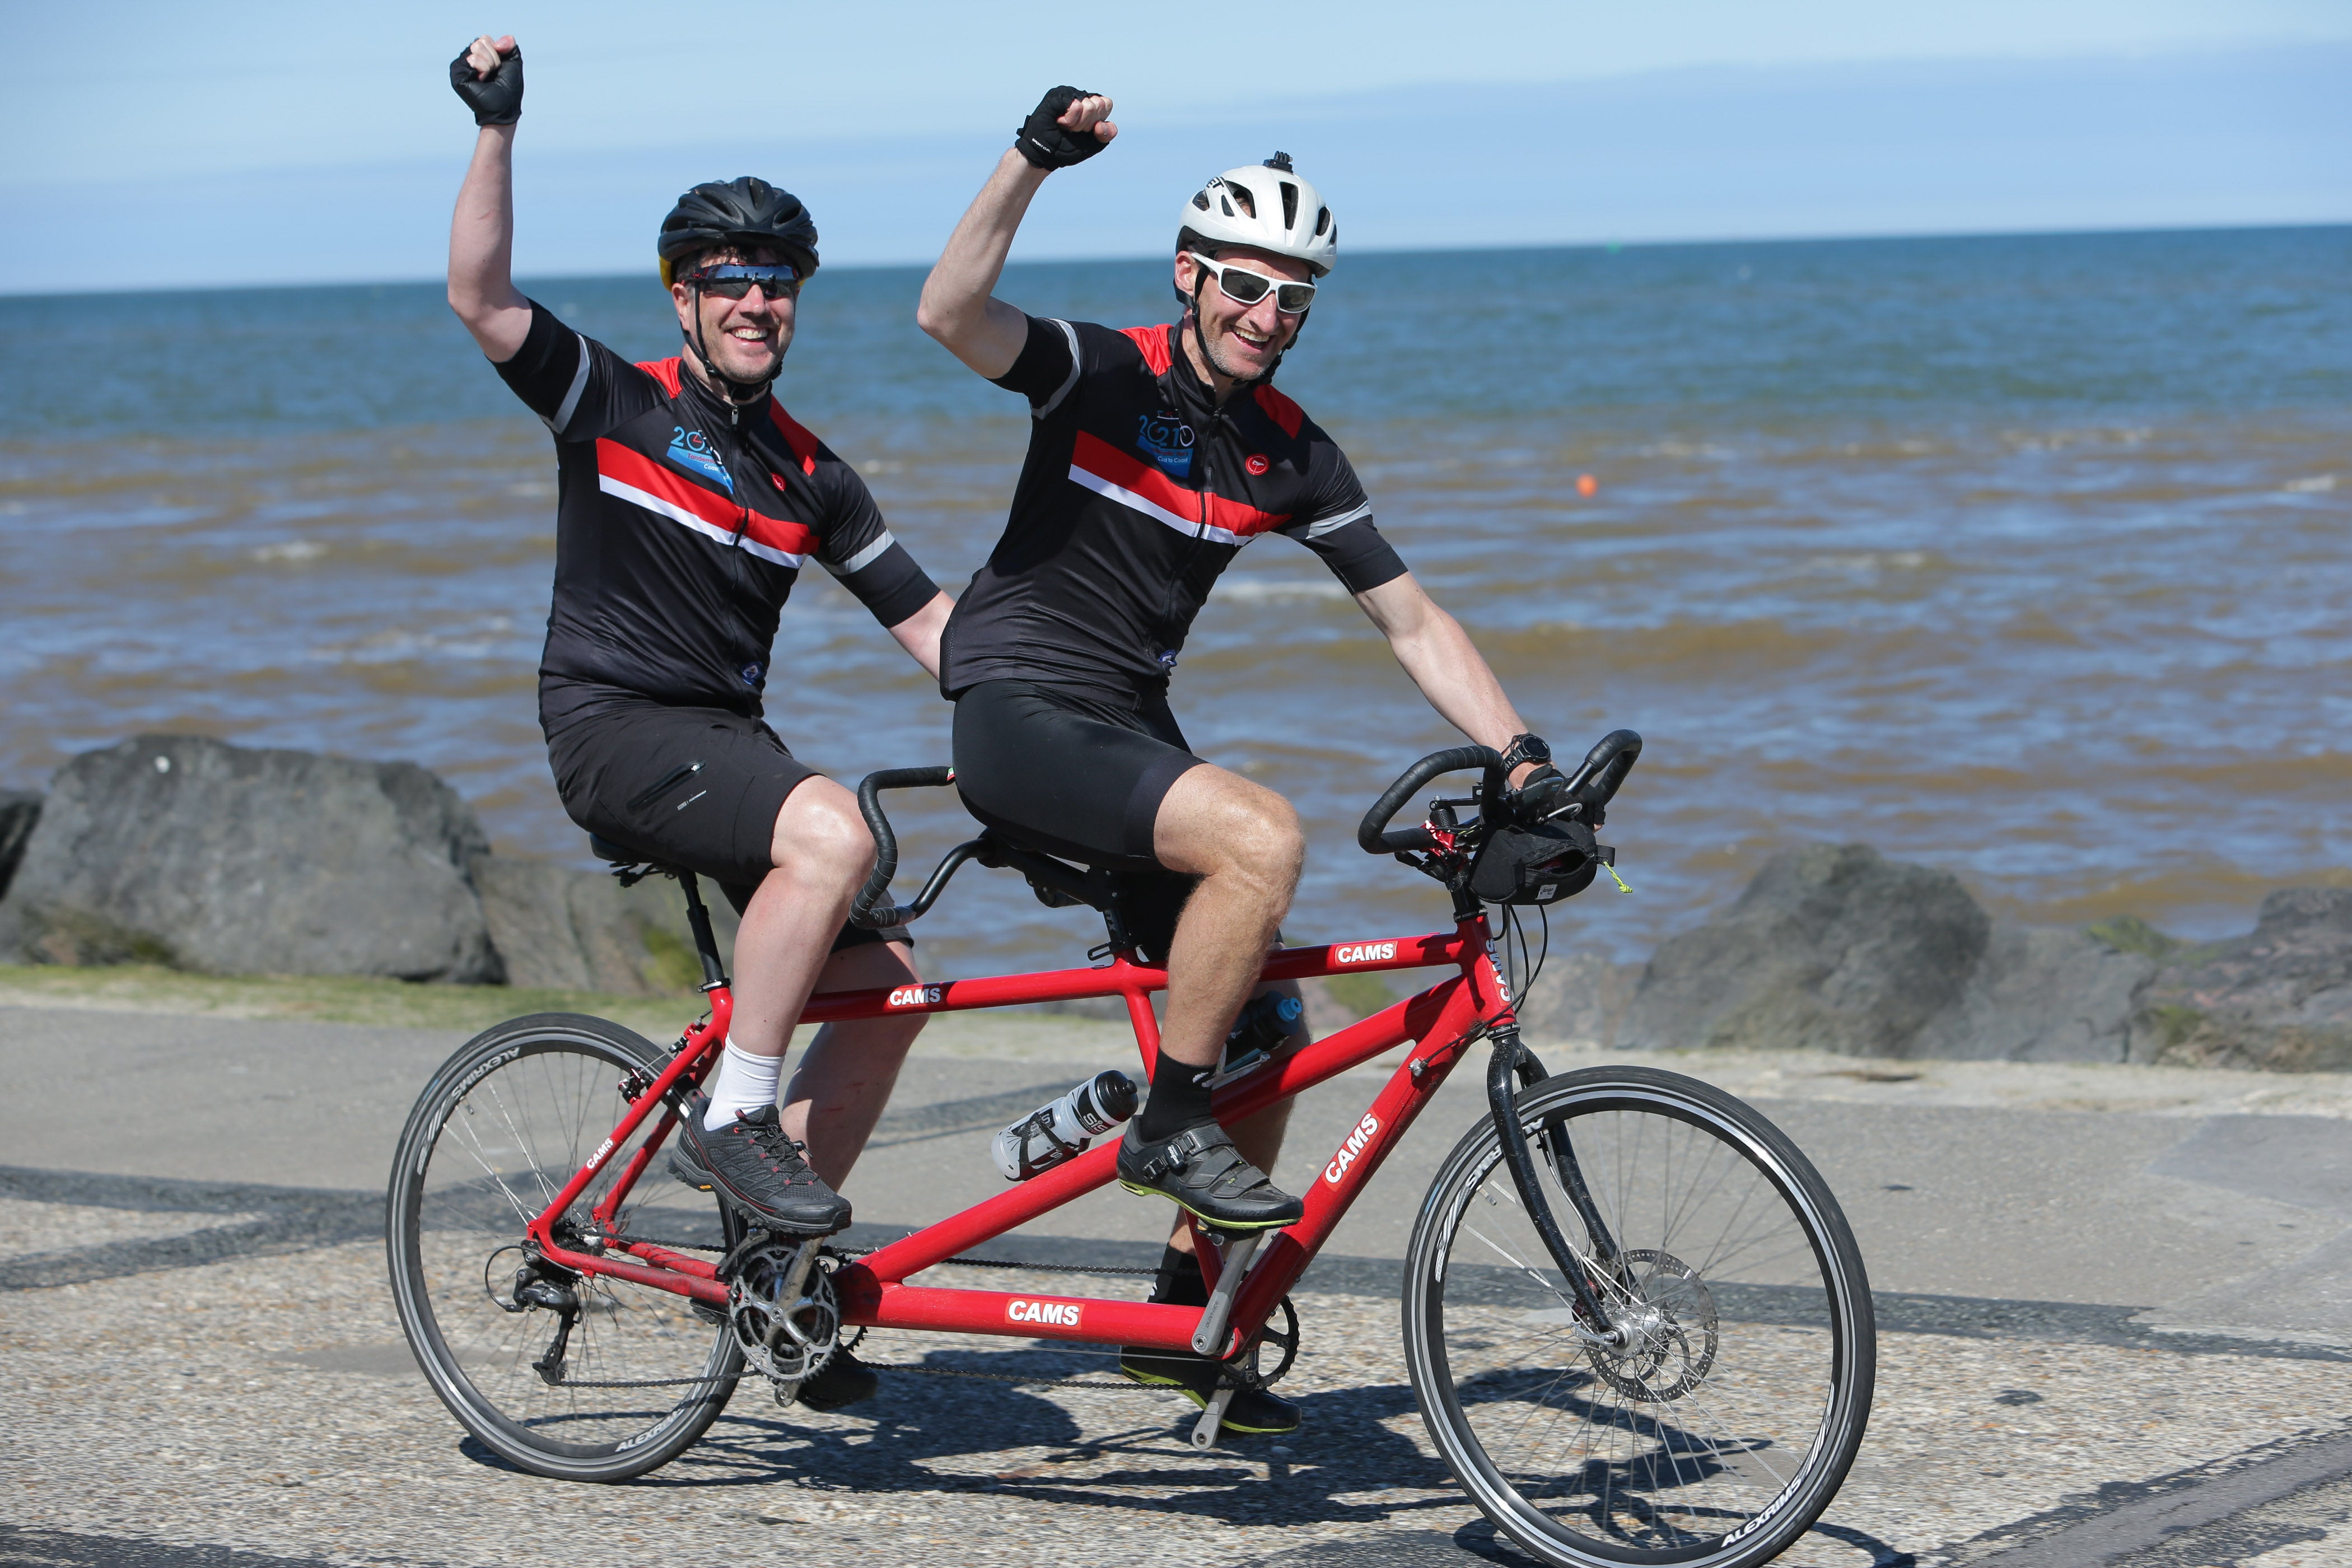 Тандем велосипед рекорд Гиннесса. Tandem Cycling sat. Joanma on Tandem. Two British women have entered the Guinness book of World records for the fastest time around the World on a Double Bicycle. Bike break